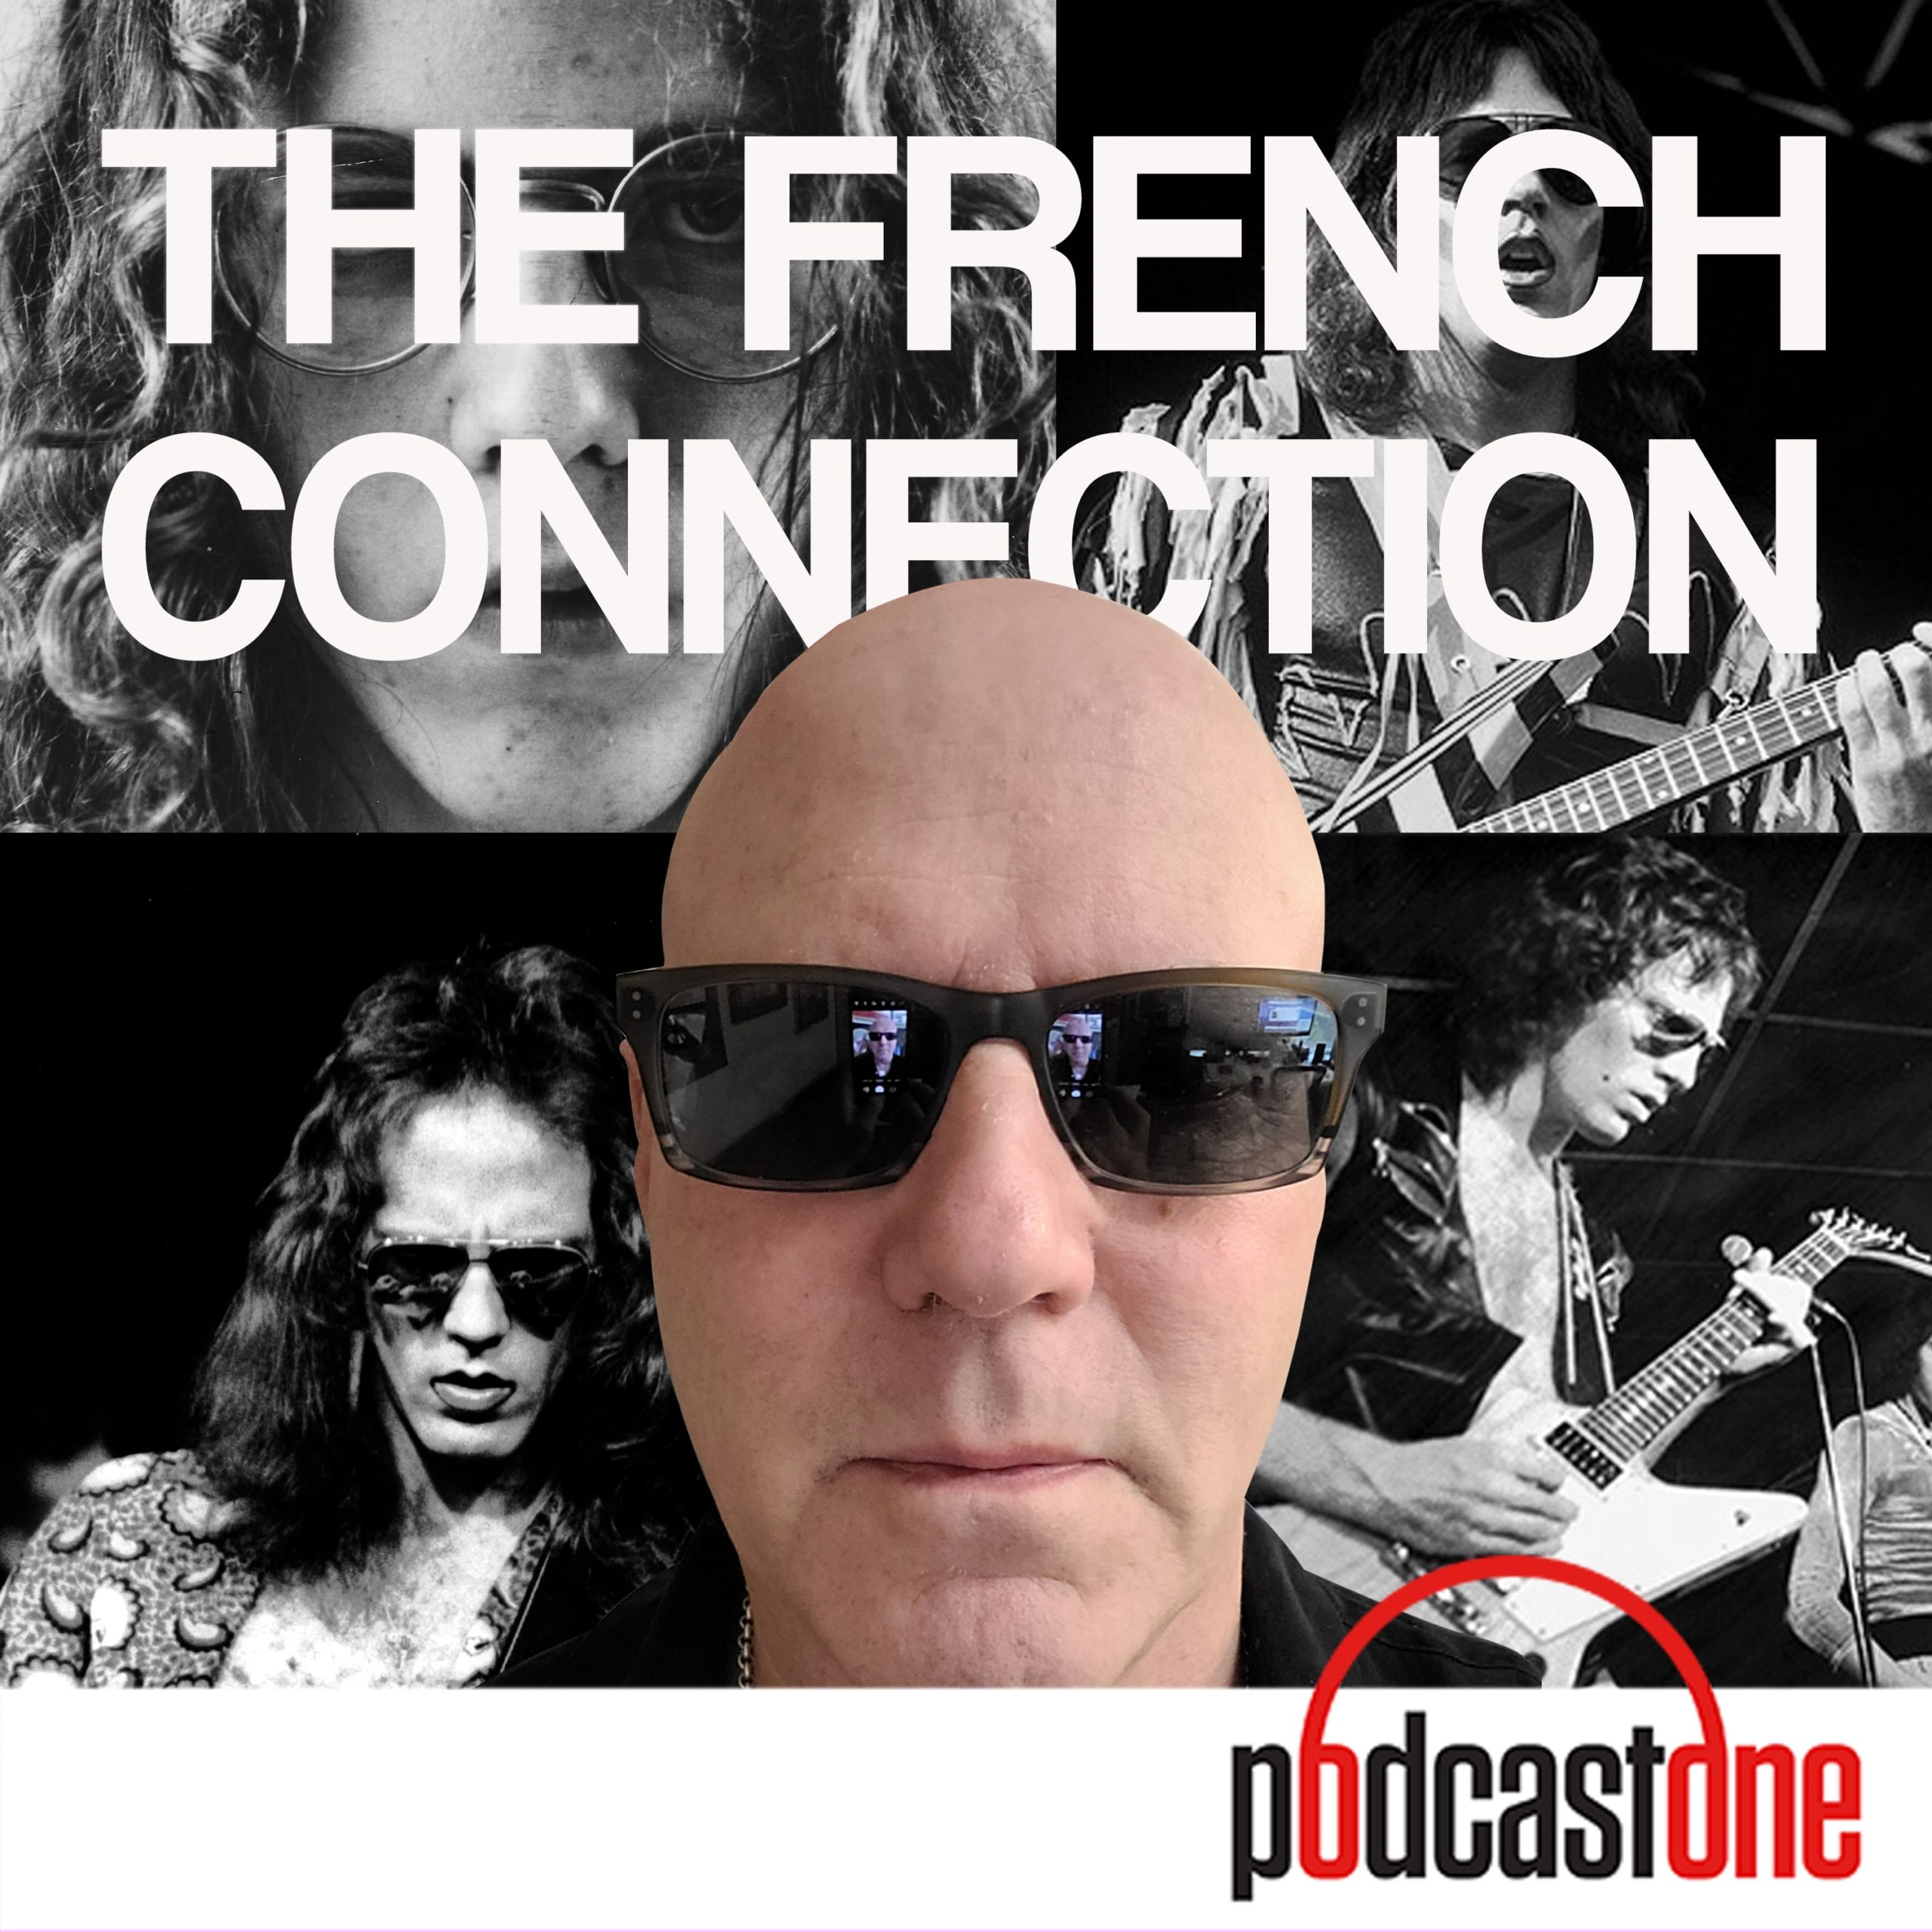 The Jay Jay French Connection, épisodes 51-55